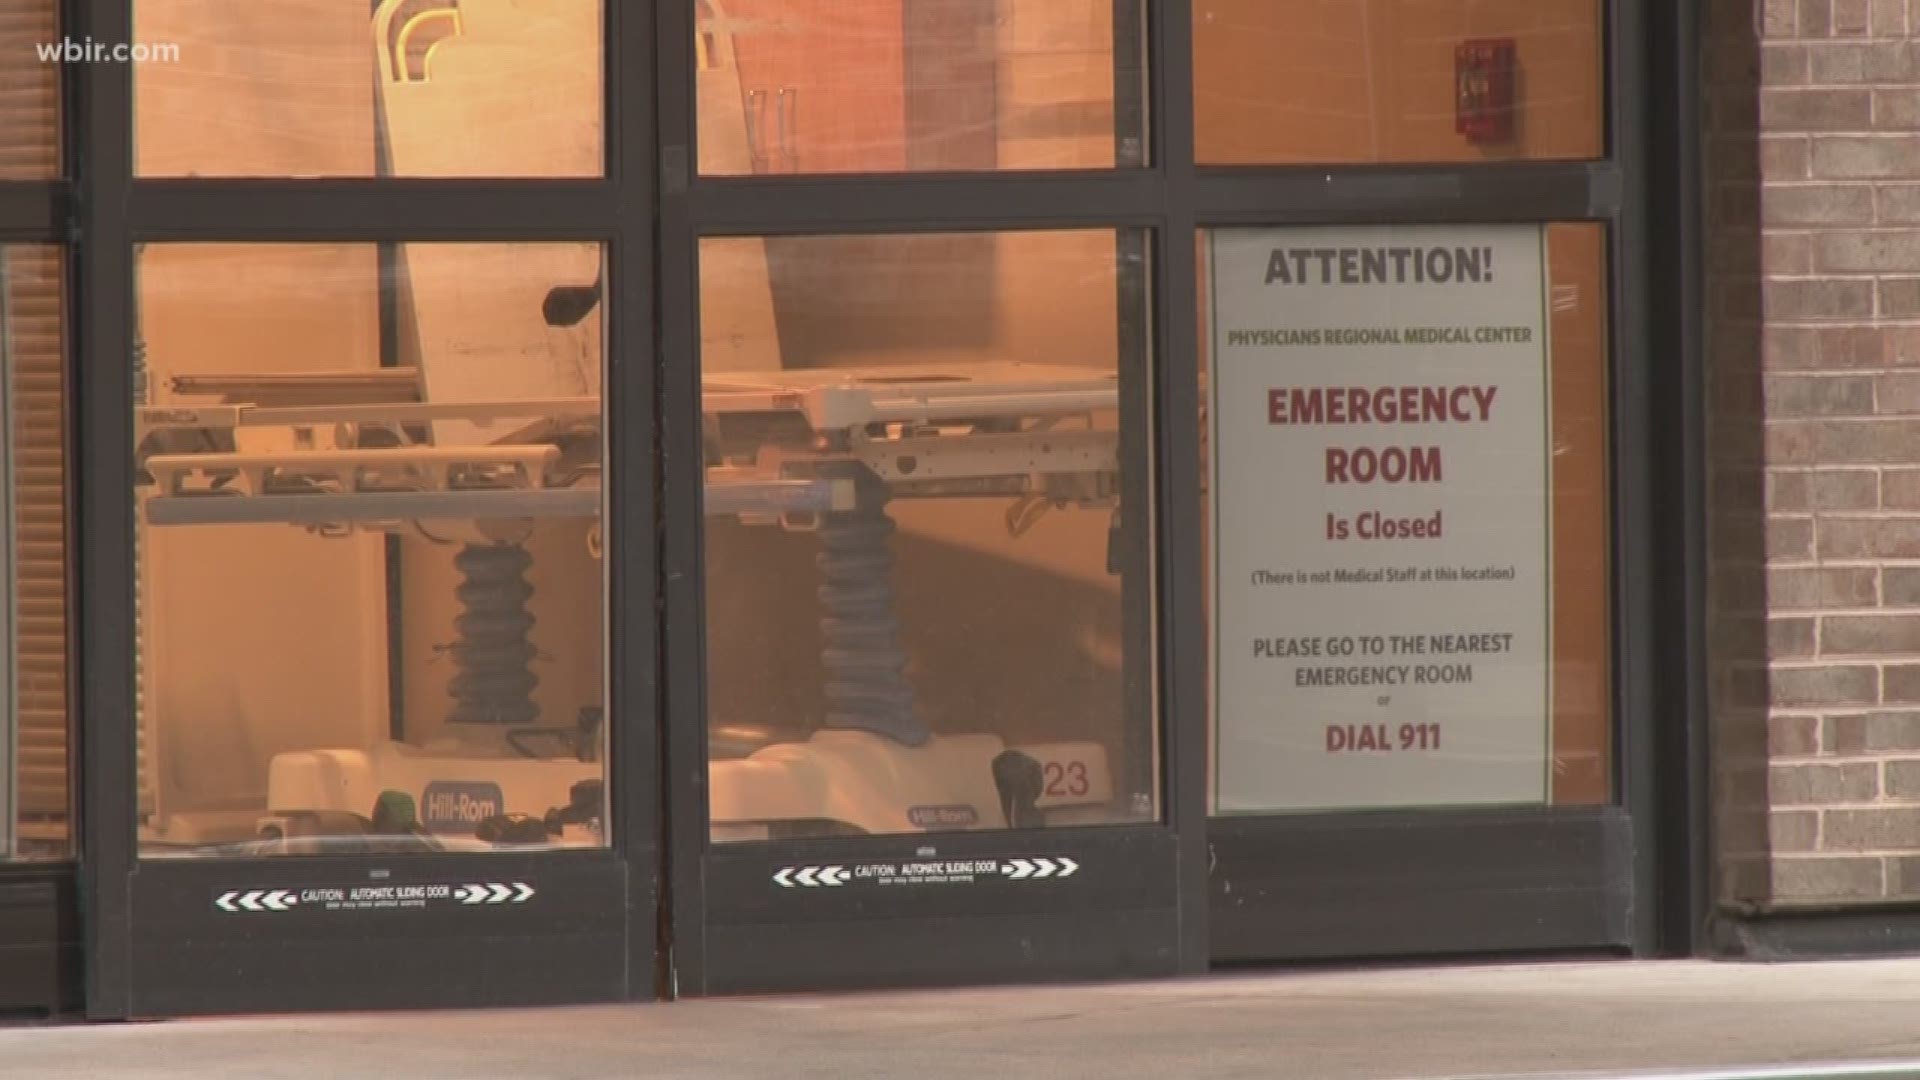 The Knox Co. Health Department says seasonal illnesses and one fewer emergency room in town could put pressure on other hospitals.